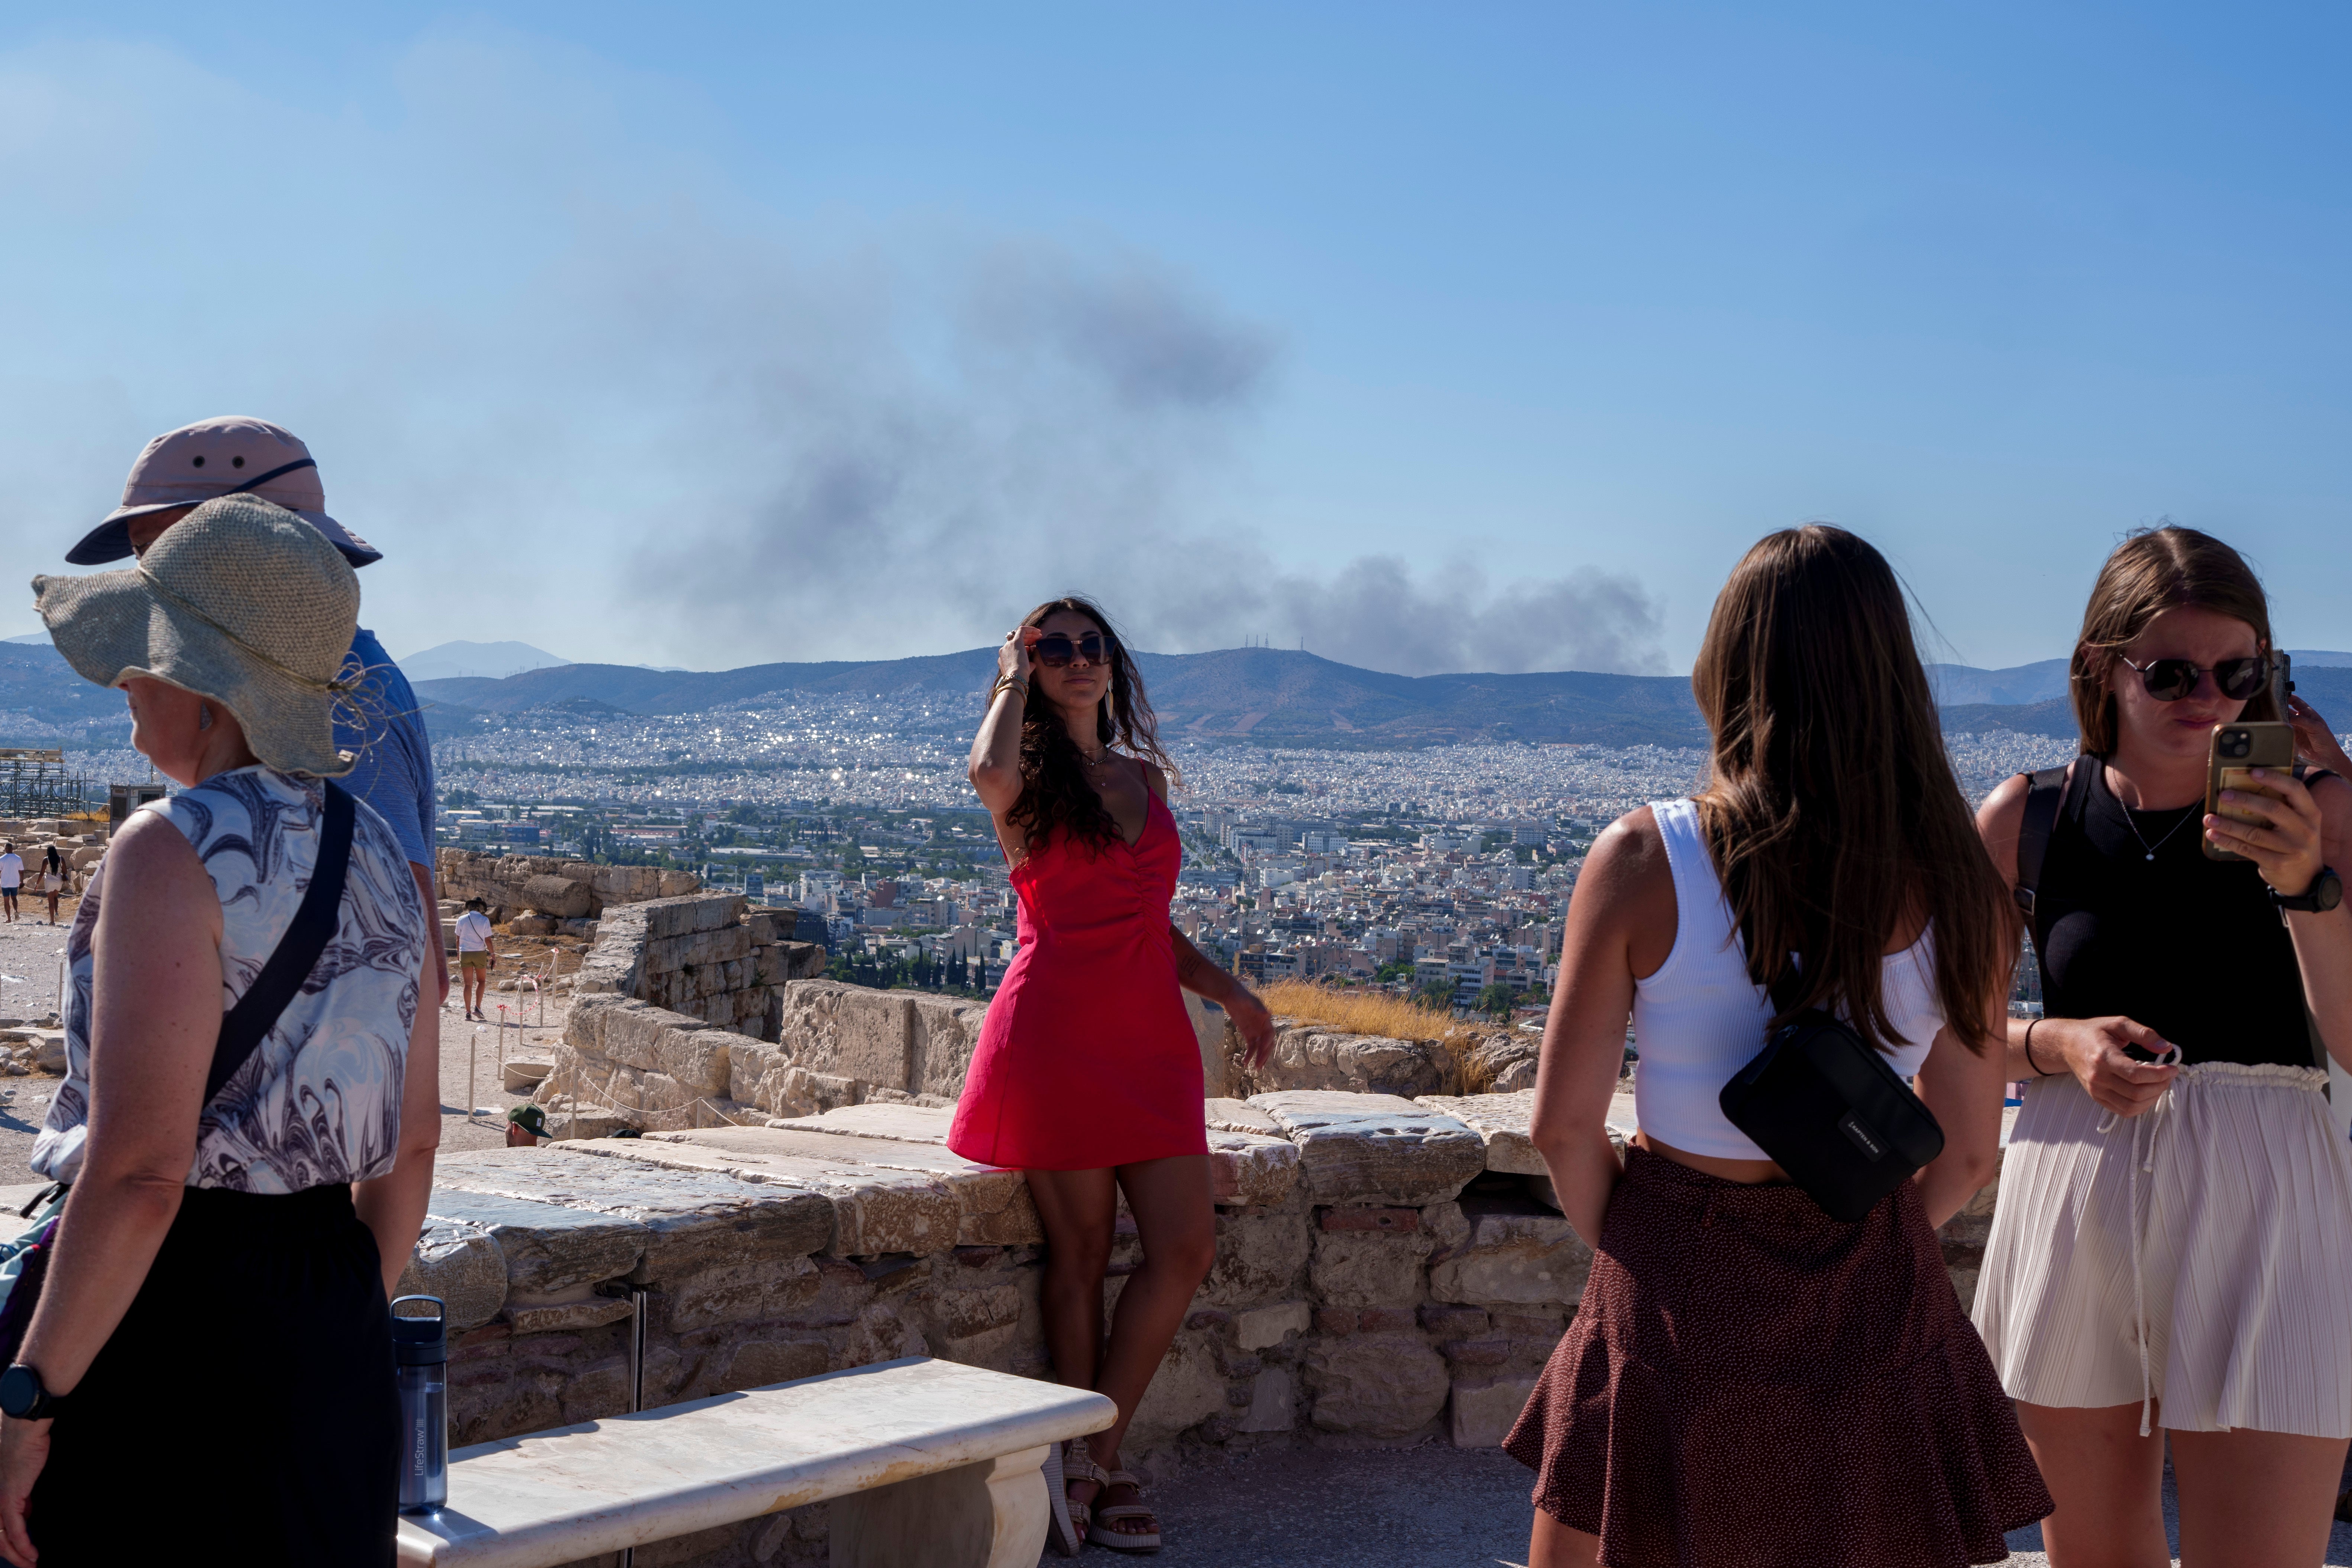 A woman poses for a photo with smoke from a fire at the background, during a hot, windy day at Acropolis hill, in Athens